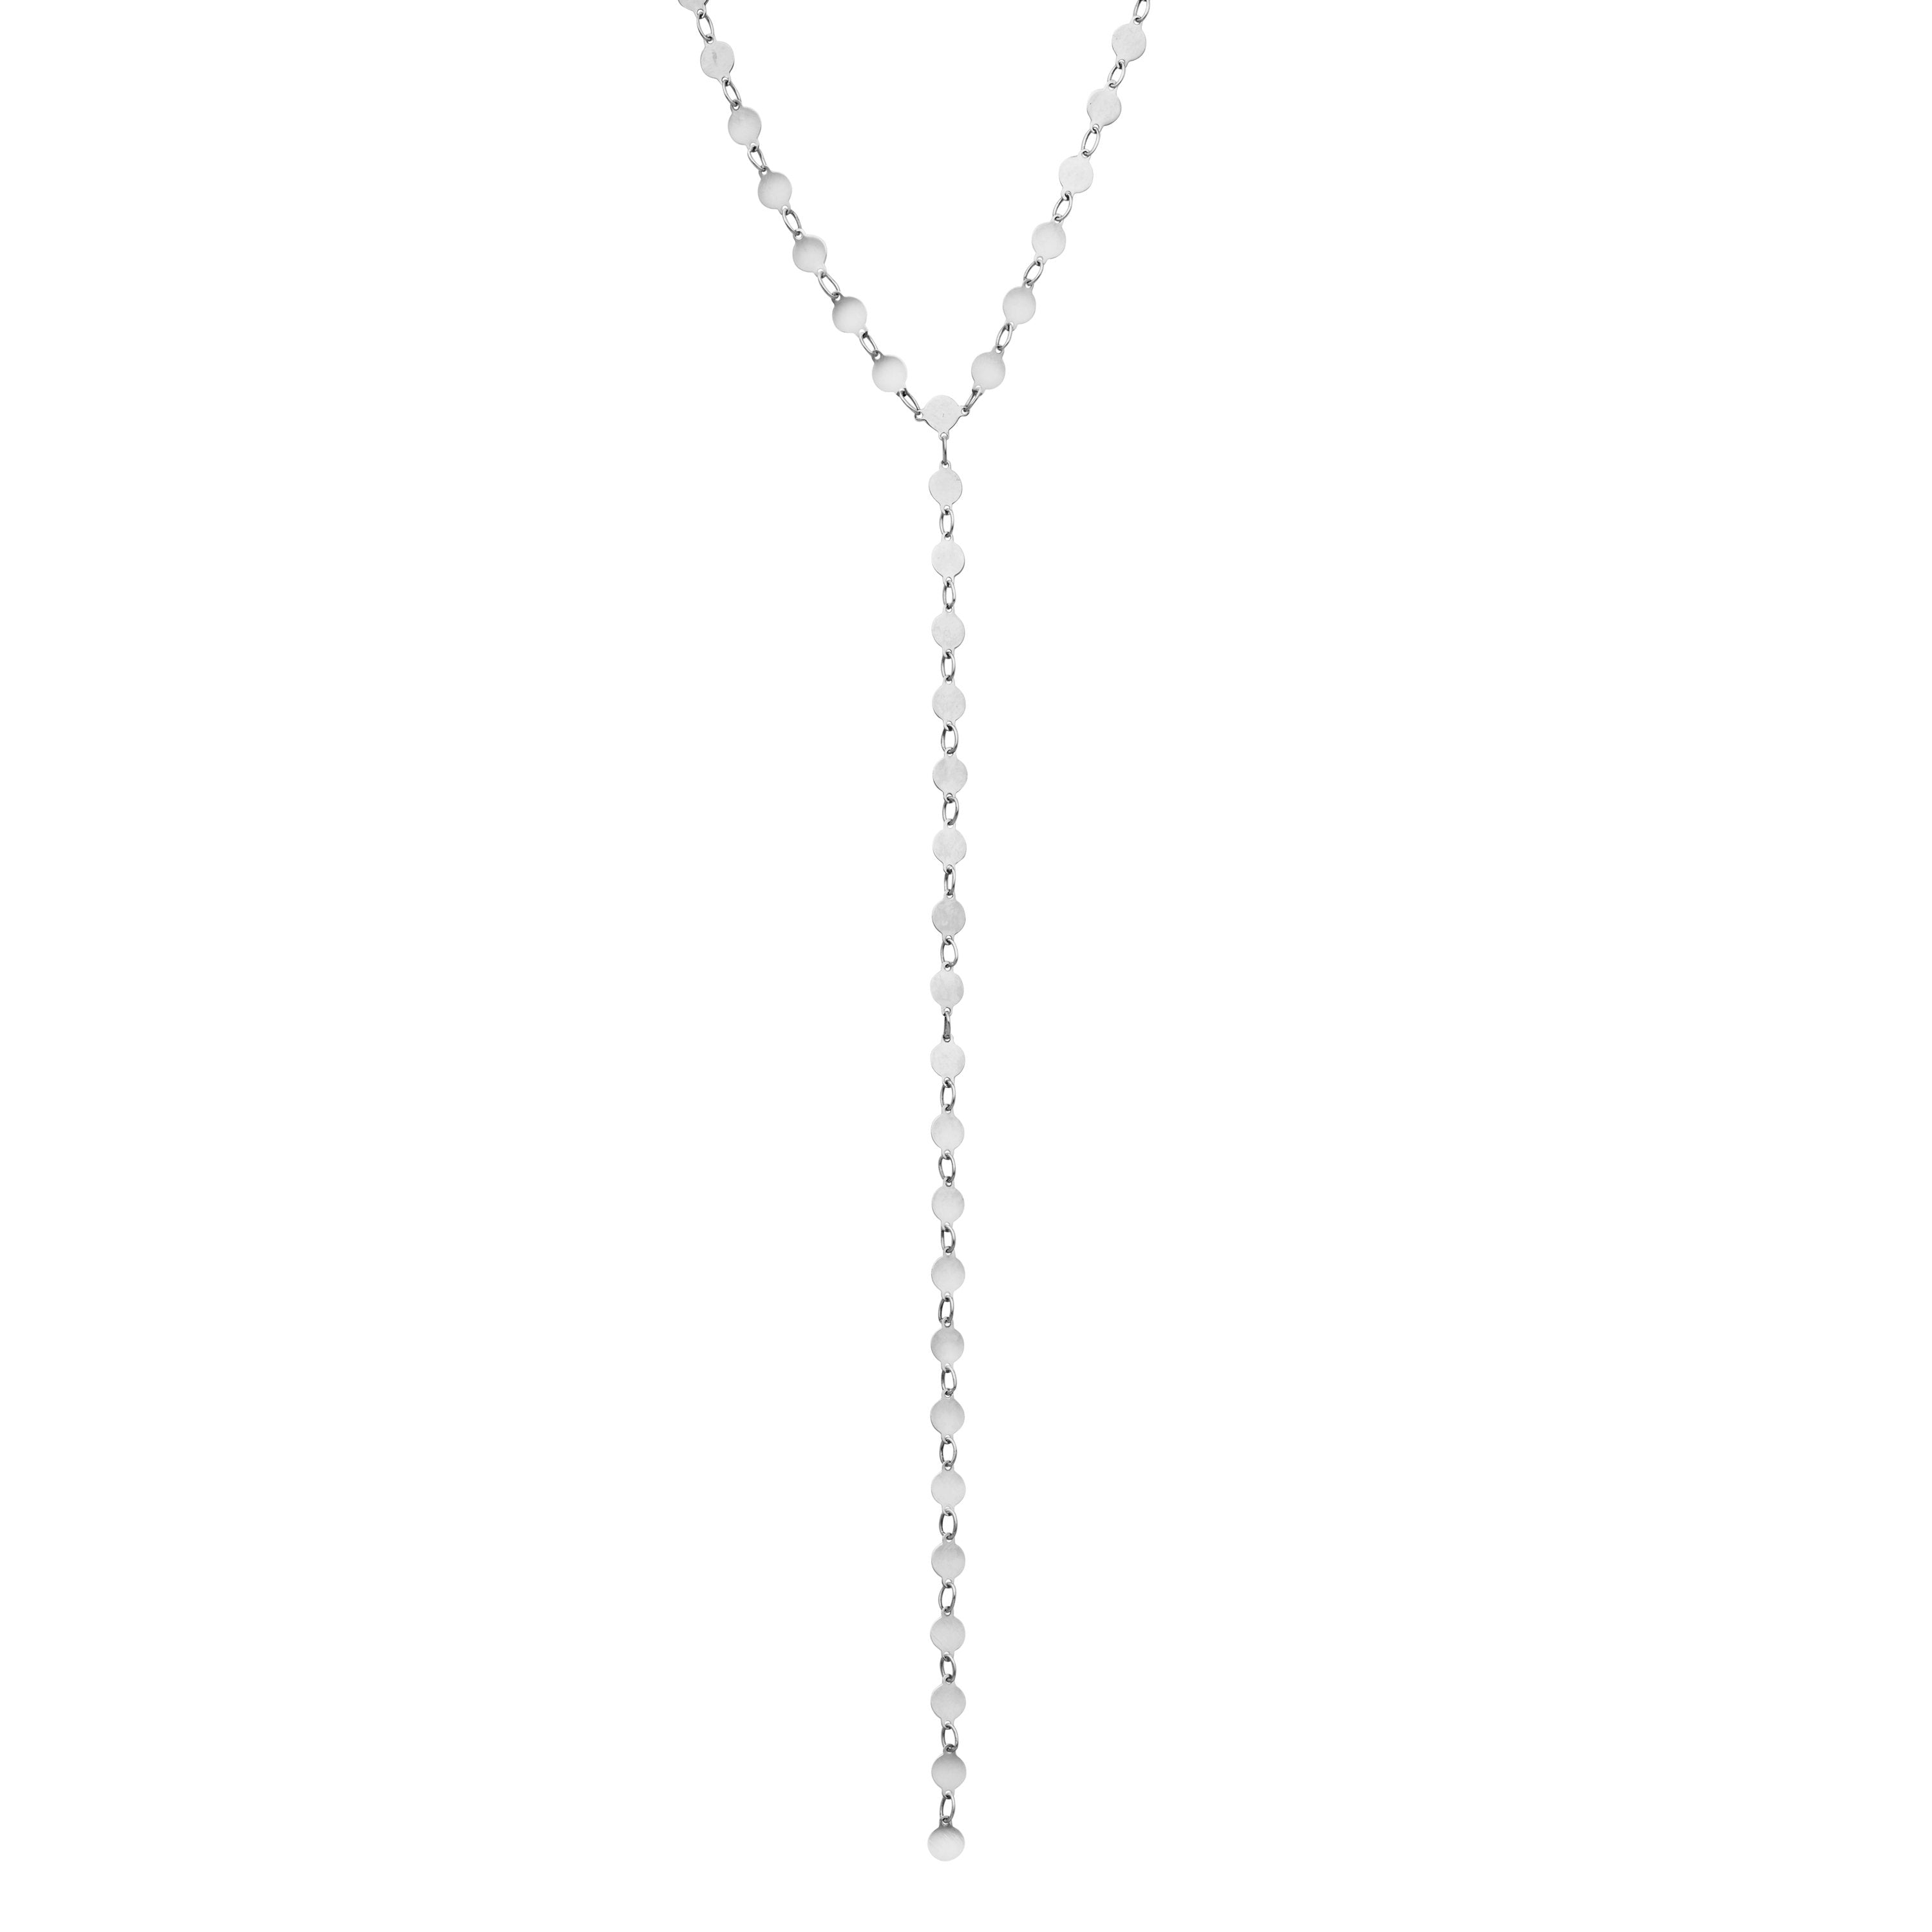 Polished Lariat Pebble Necklace with Lobster Clasp